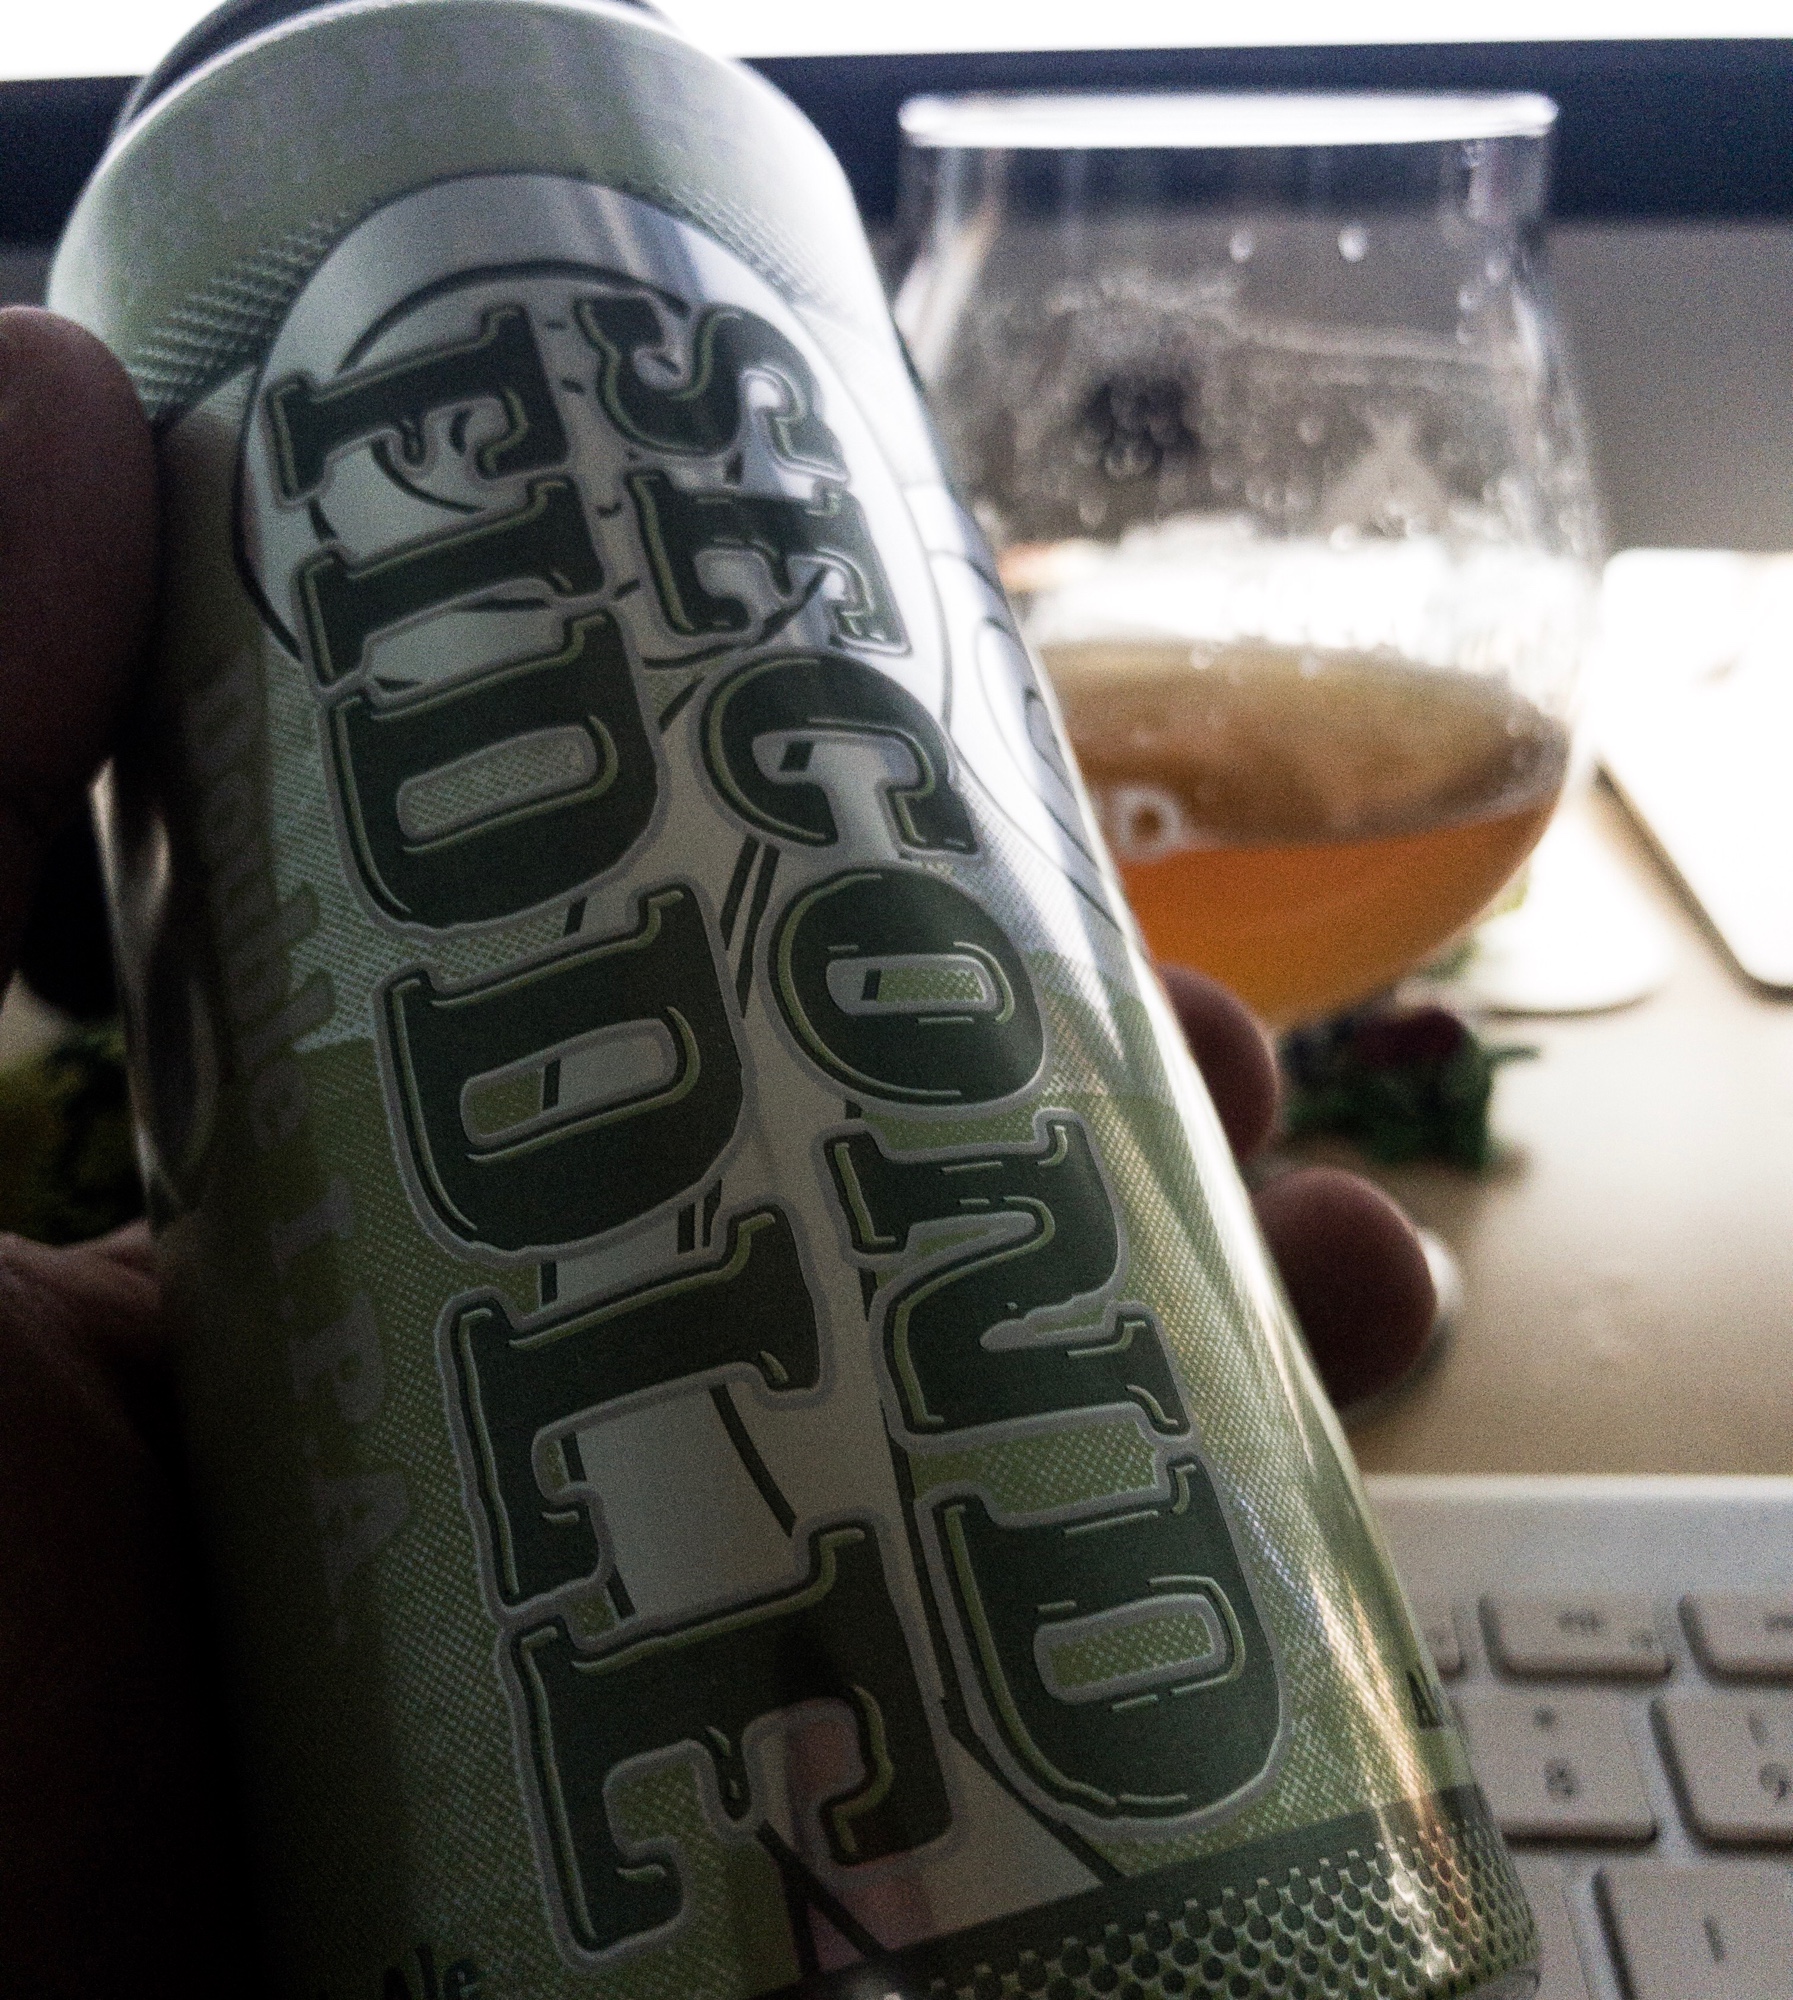 Fiddlehead Brewing Company's Second Fiddle